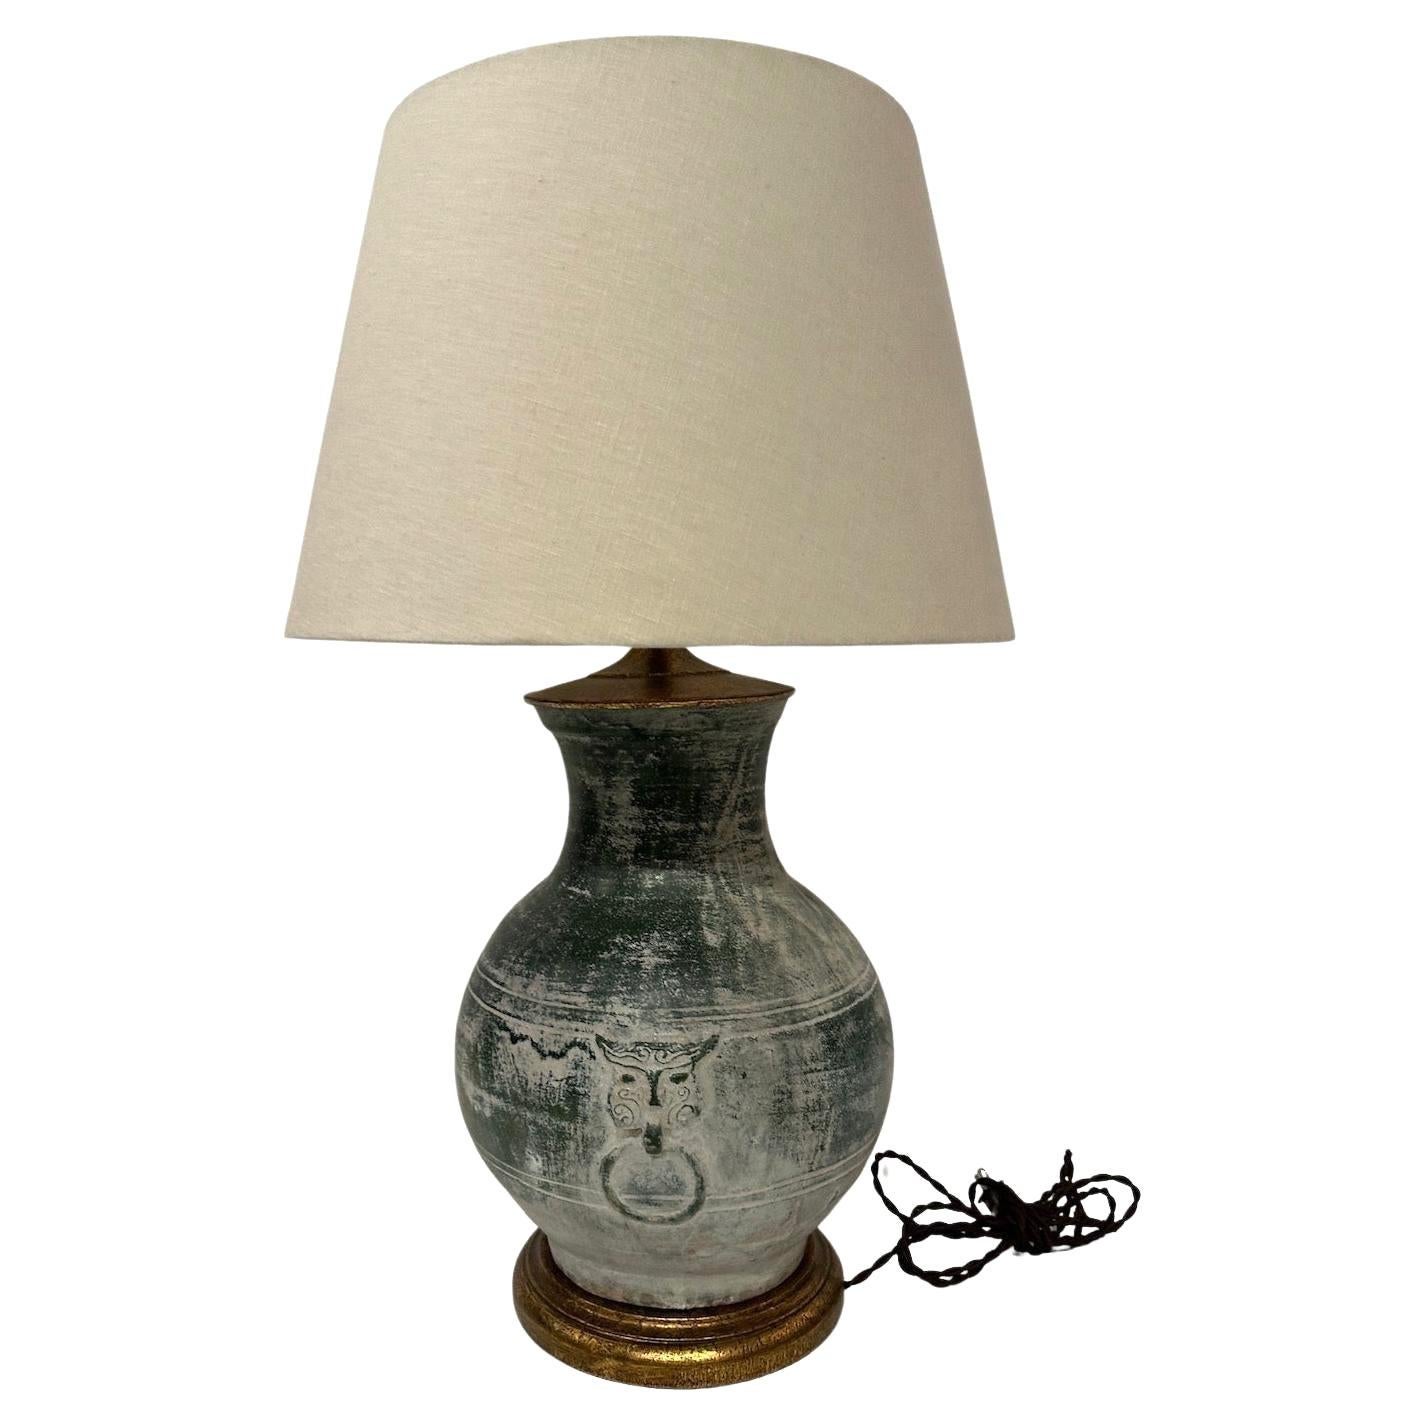 A circa 1920’s, Han Dynasty style vase, later made into a lamp mounted on a gilded wooden base.  Single bulb.  Woven shade.

Overall 27.75”H   Vase:  14”H x 12”Diam.  Shade:  17” Diameter
